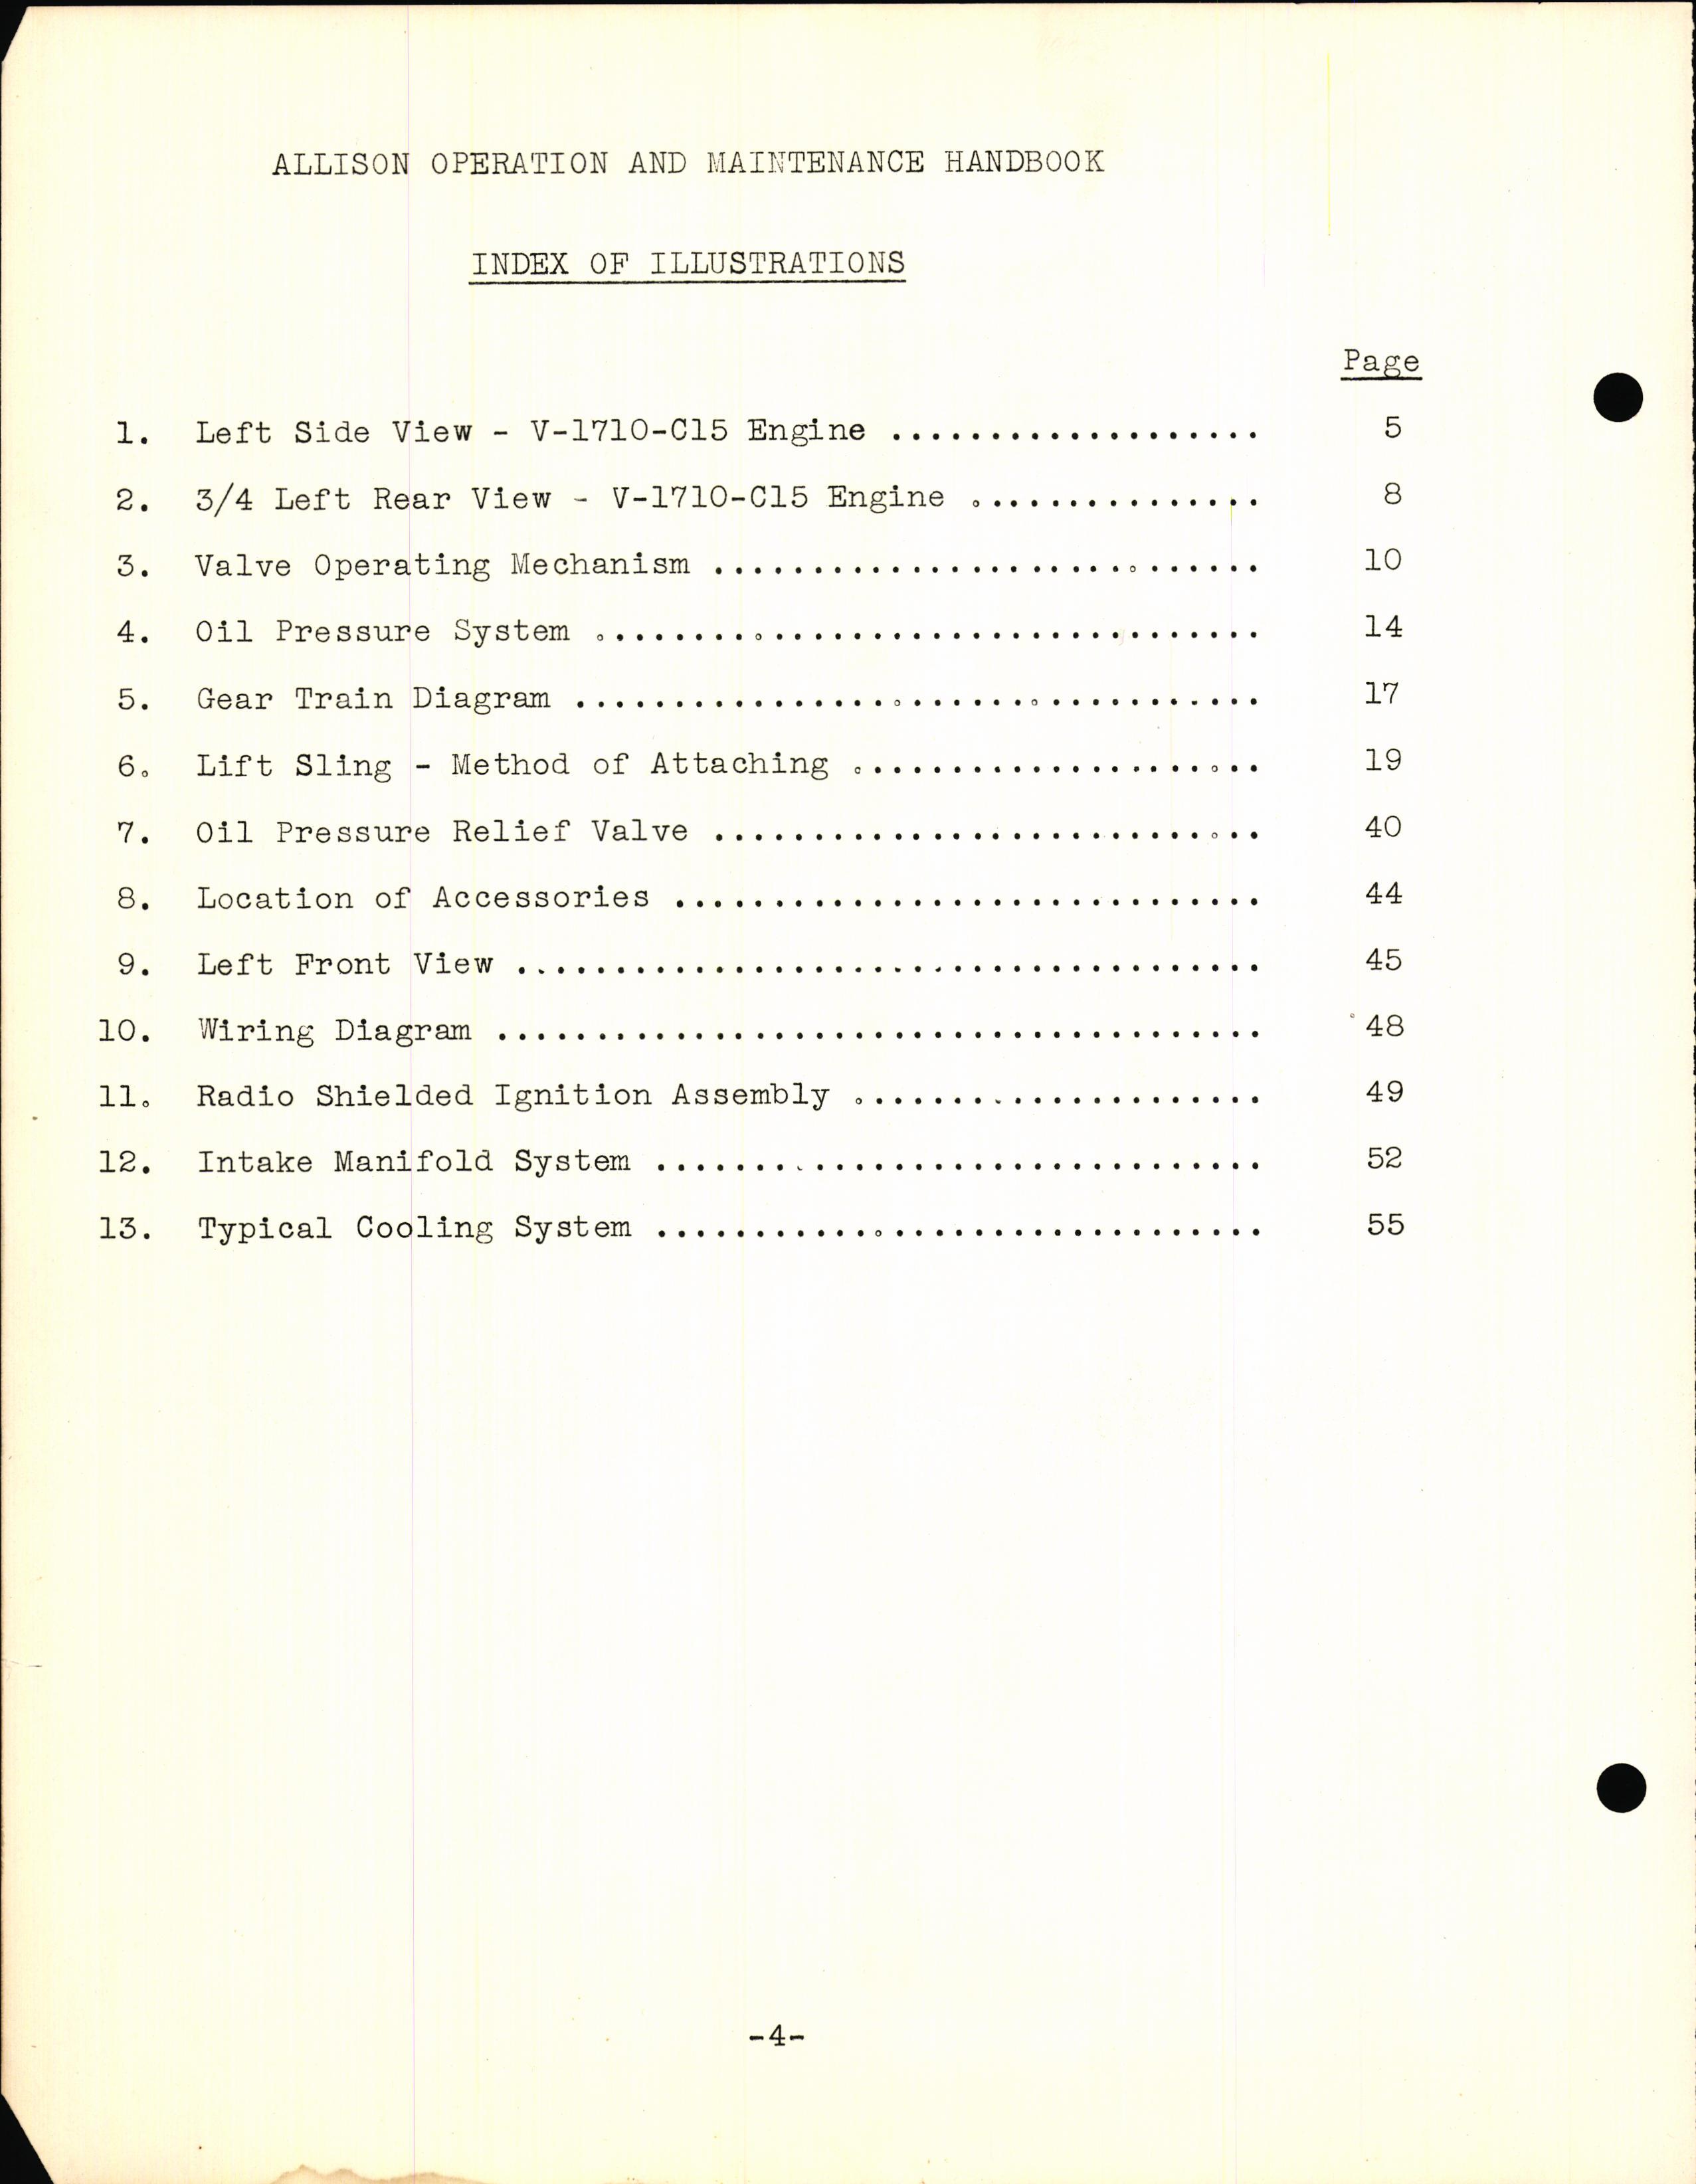 Sample page 10 from AirCorps Library document: Operation, Maintenance & Overhaul Handbook for Model V-1710-C15